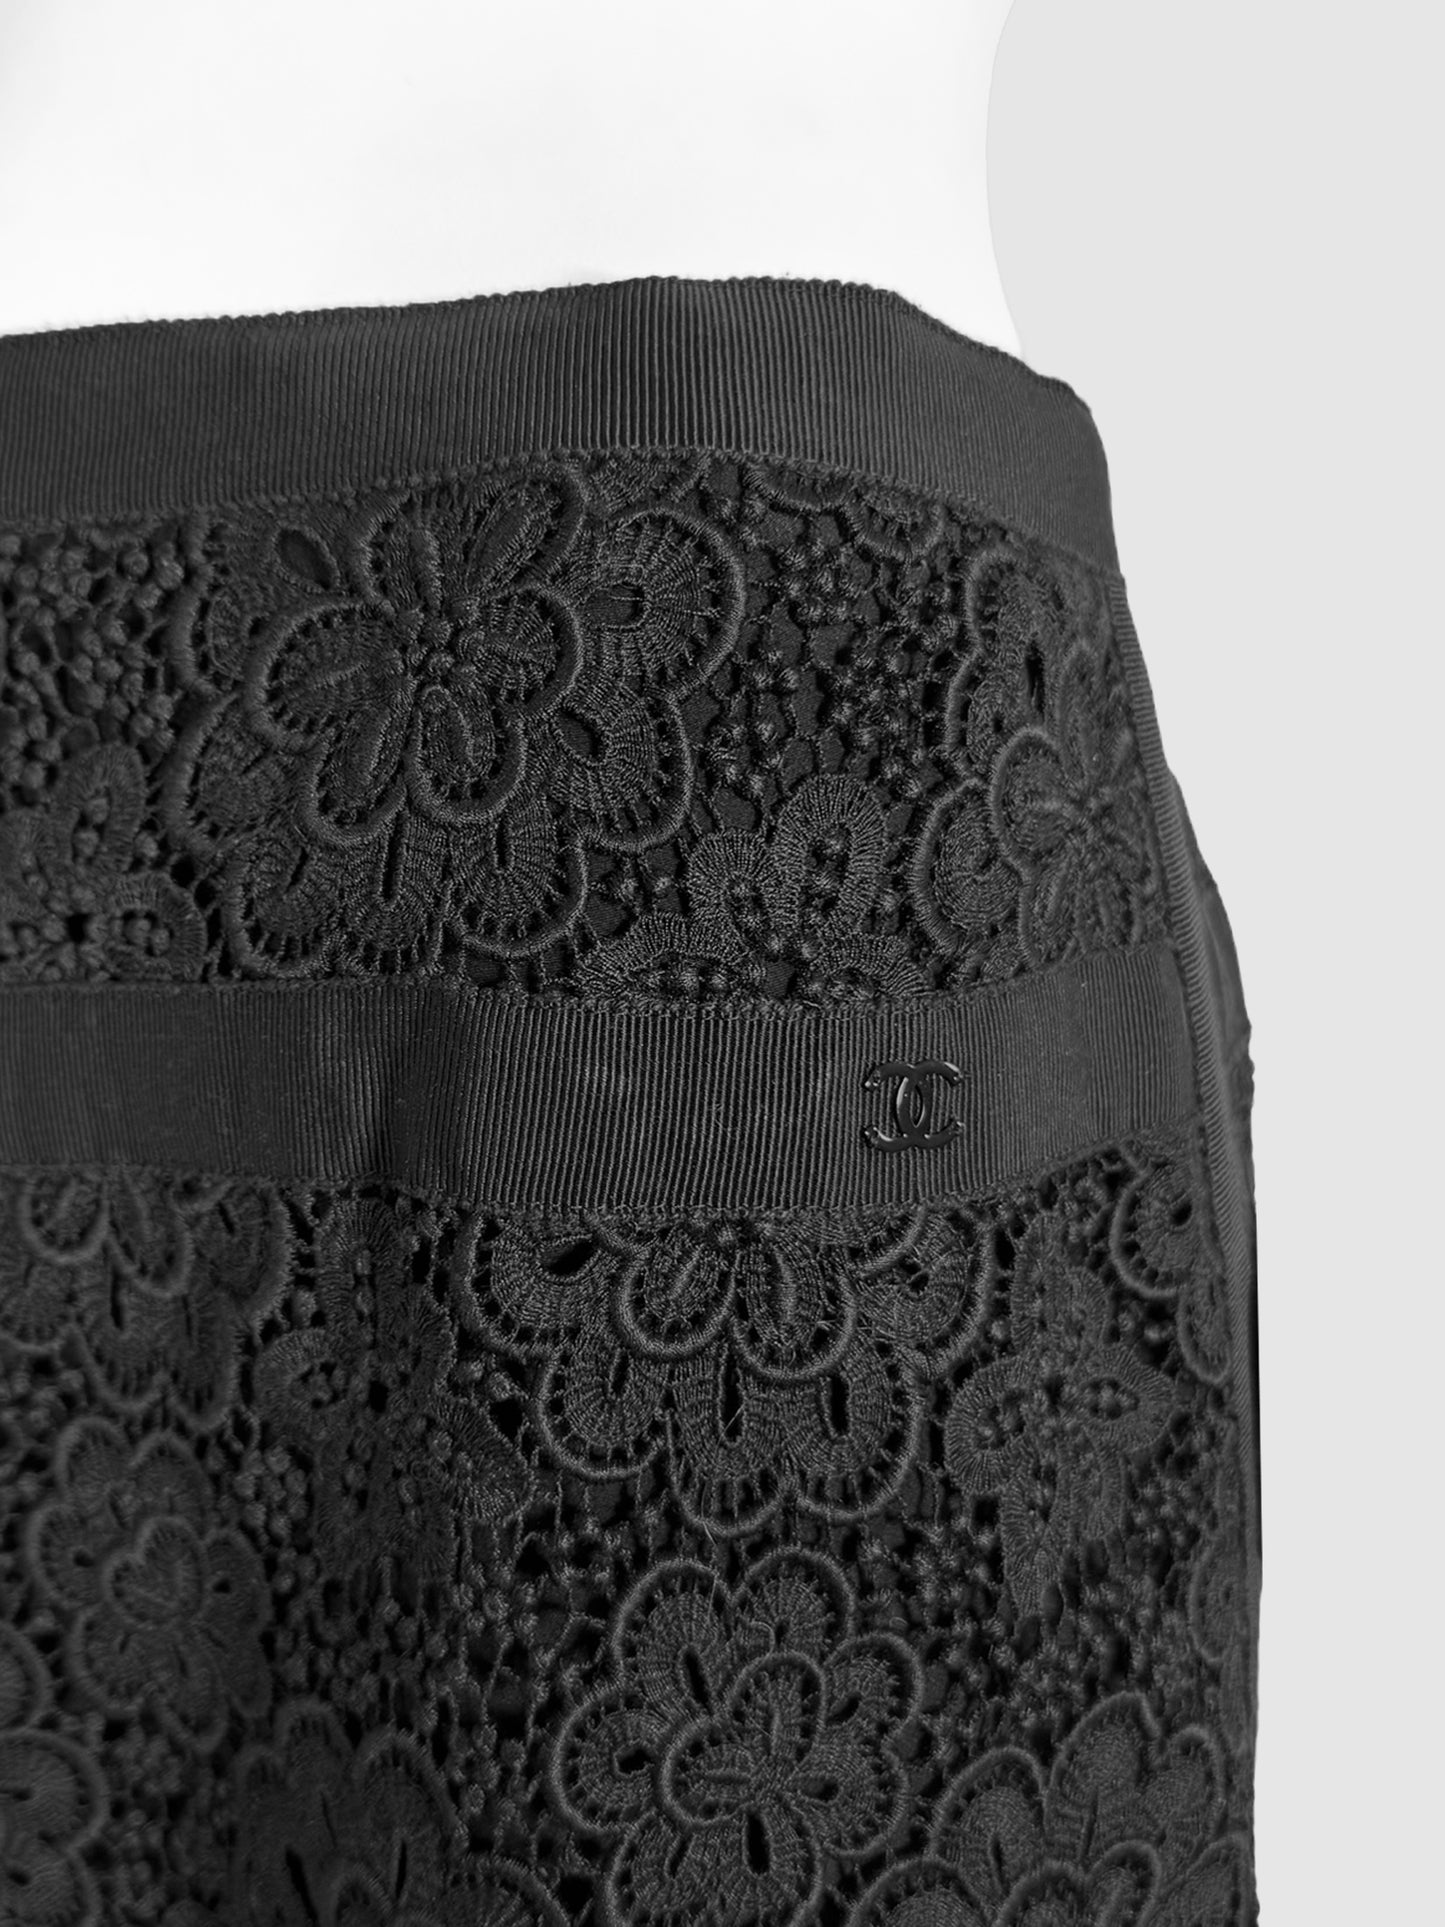 Floral Lace Knee-Length Skirt - Size 44